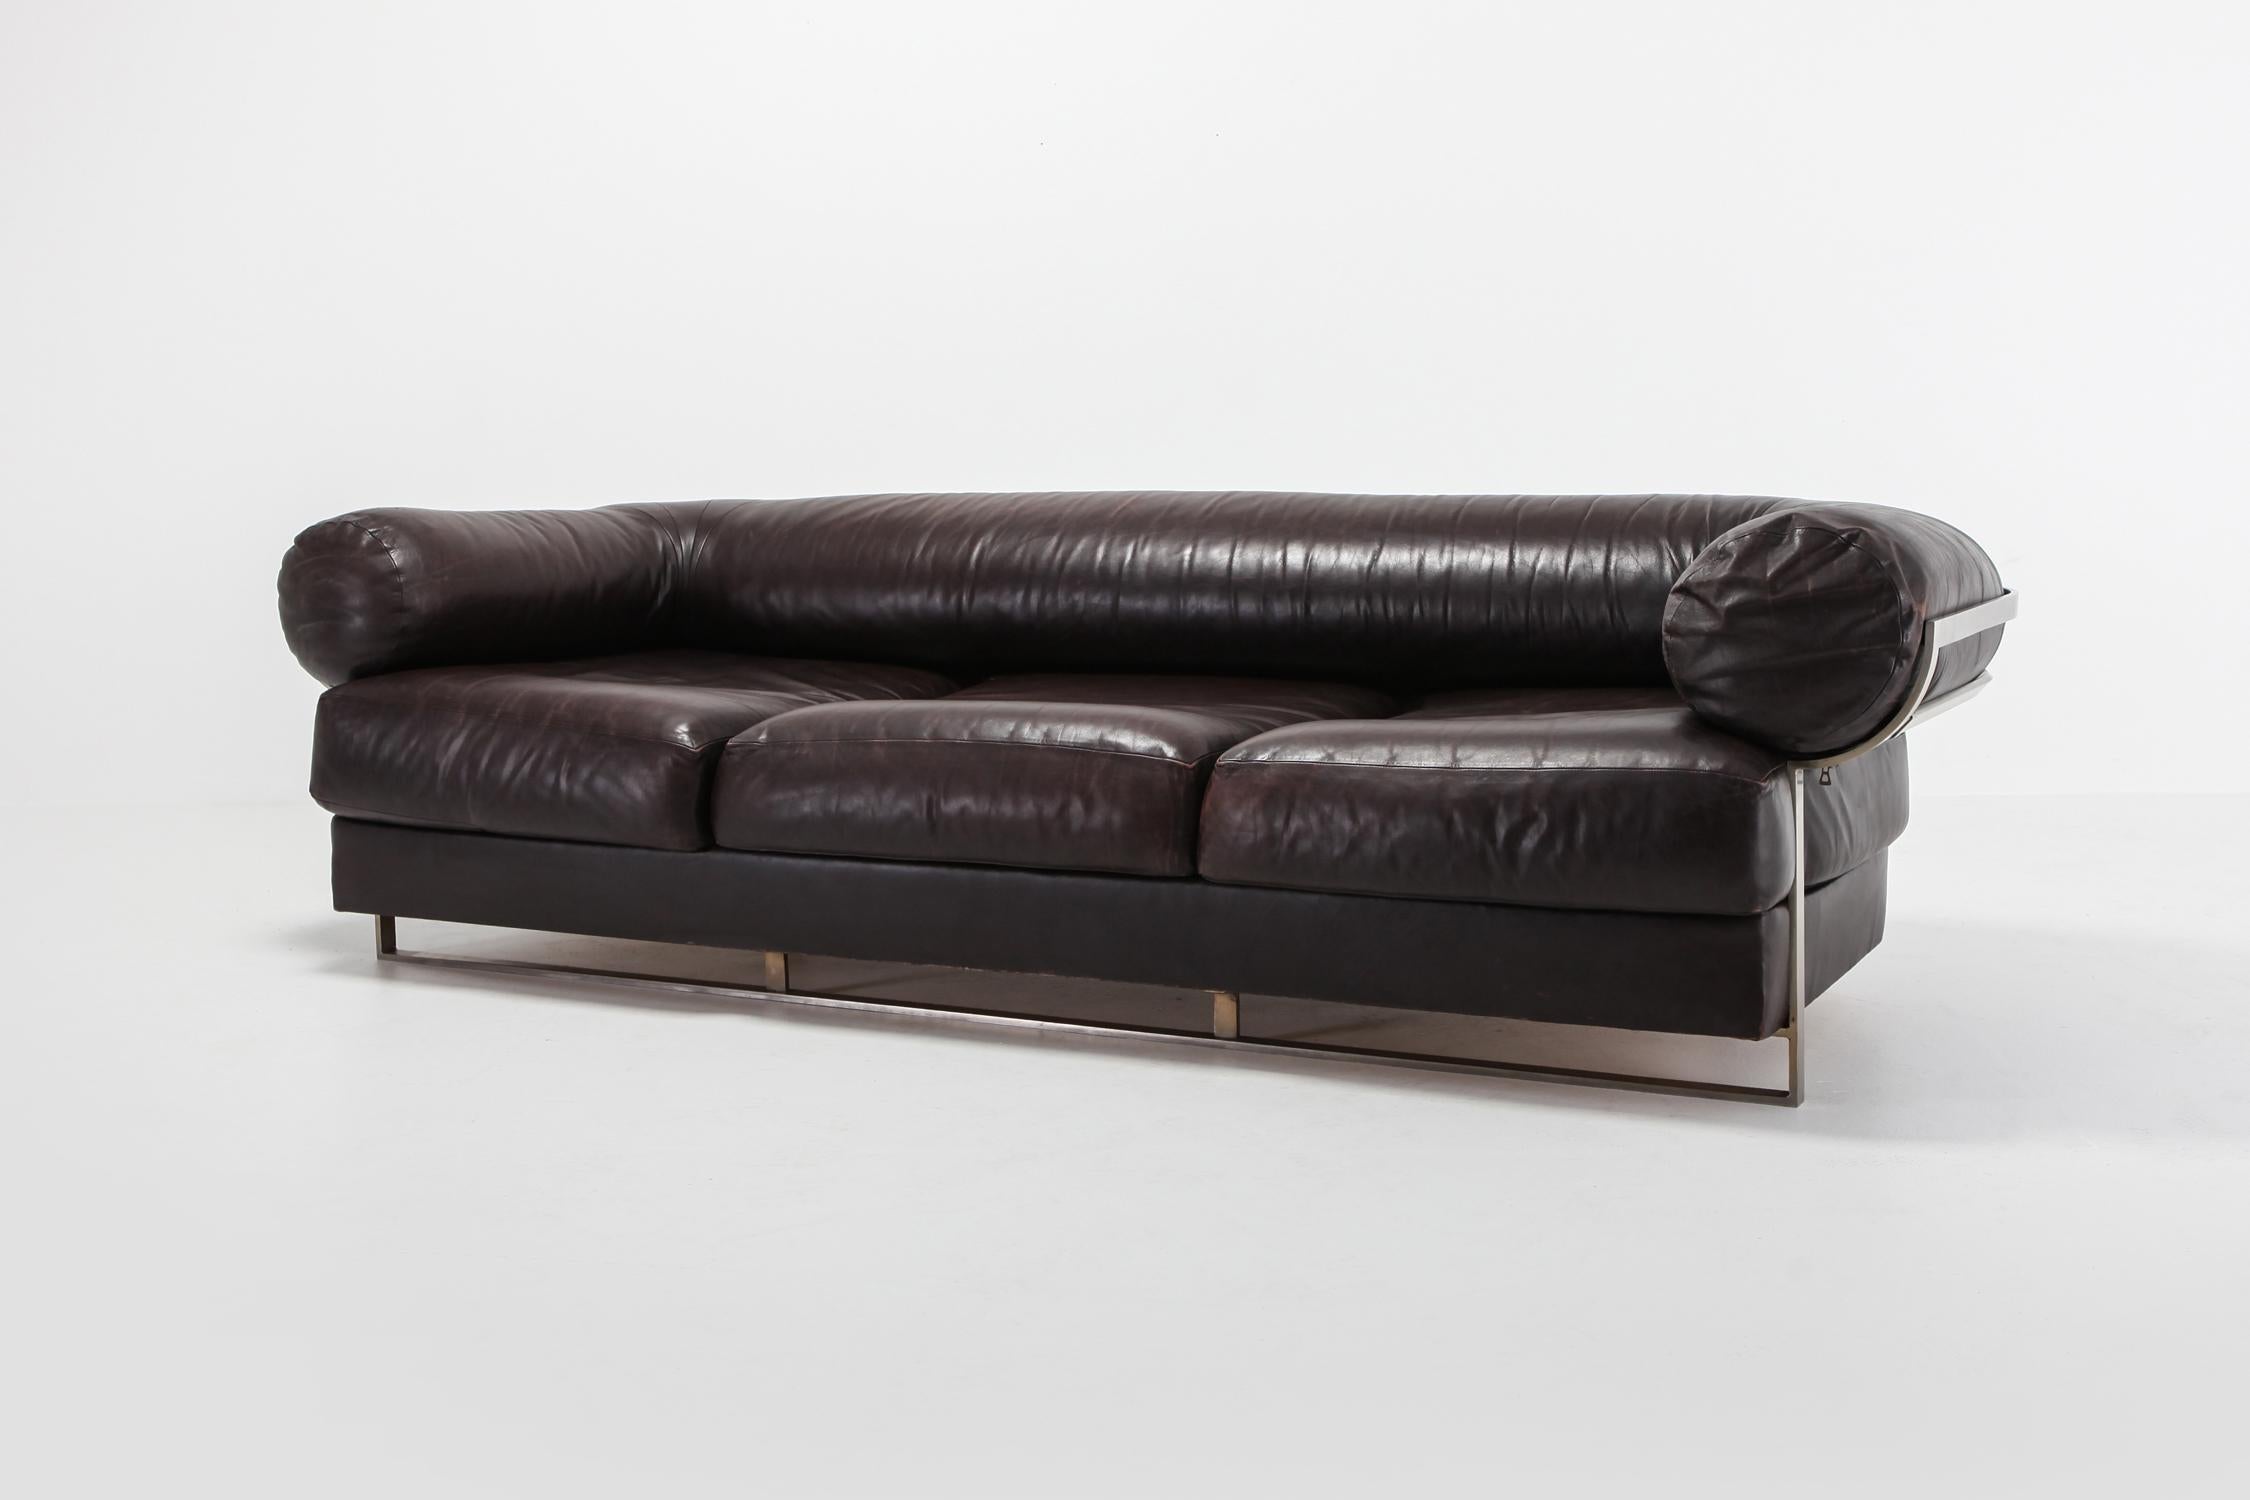 French Charpentier Brown Leather 'Apollo' Sofa in Stainless Steel Frame For Sale